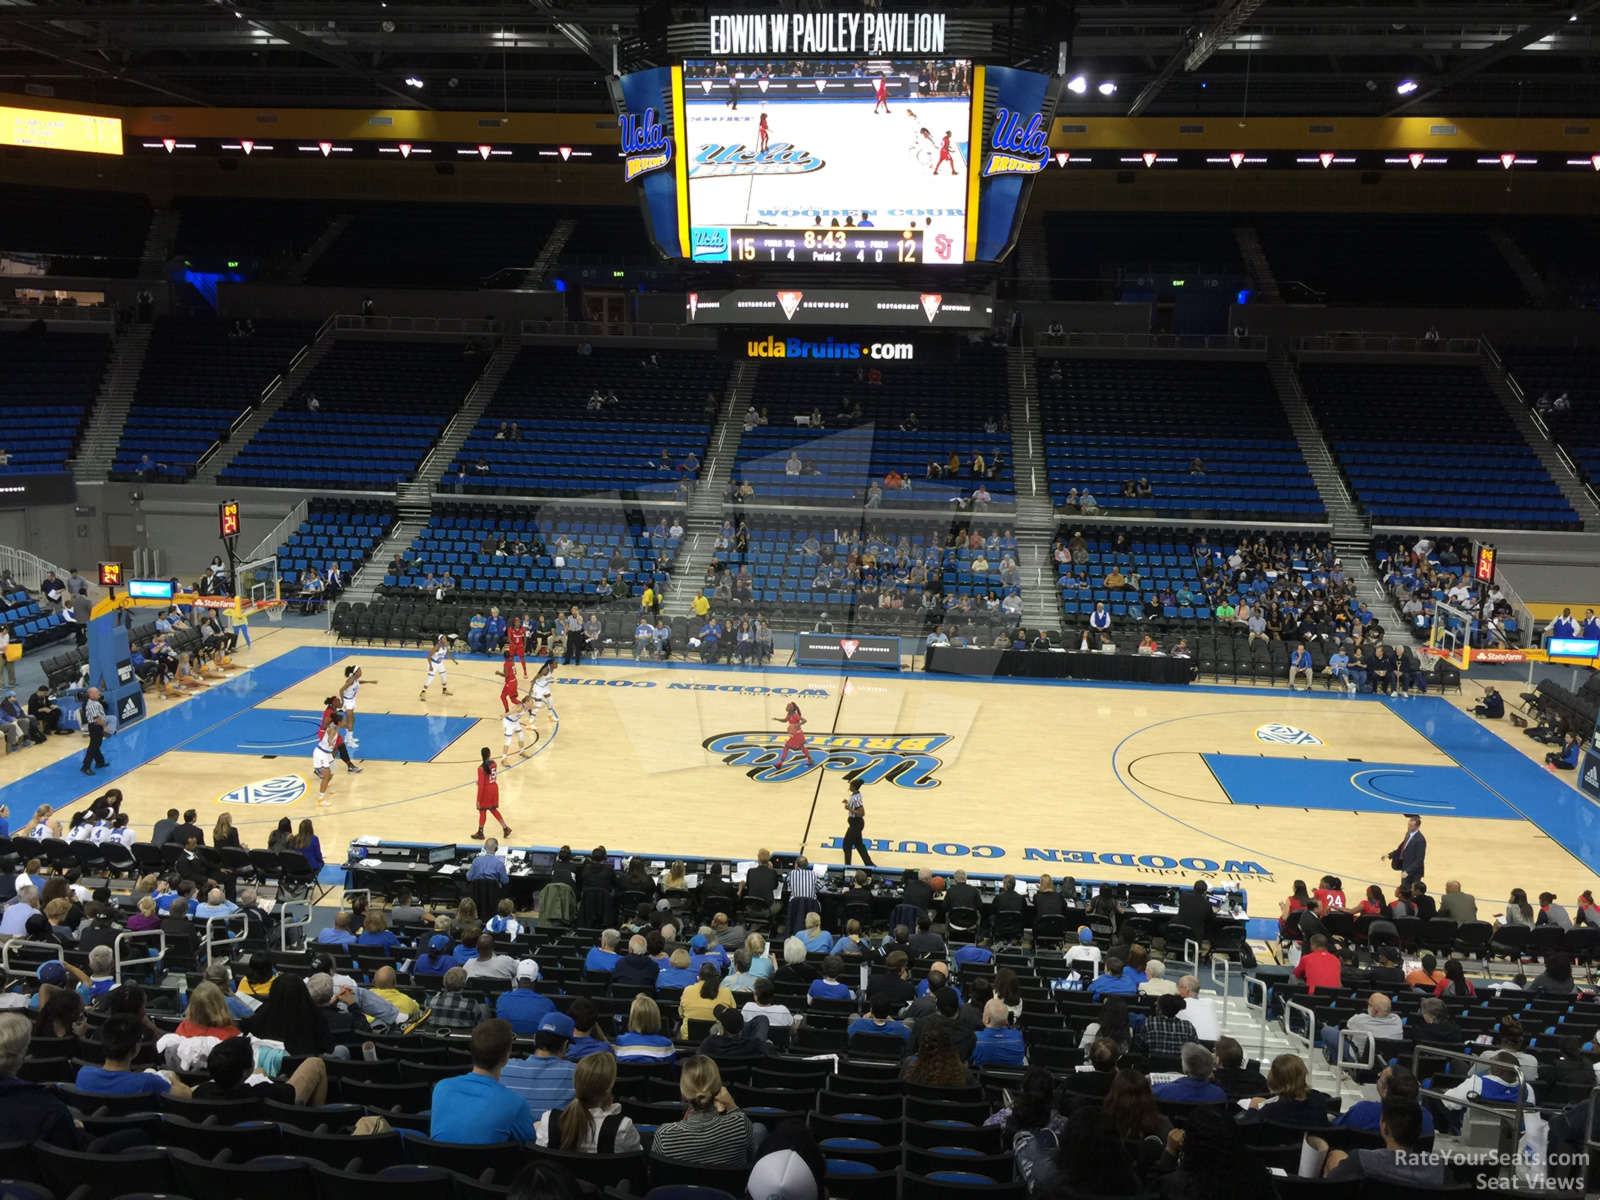 section 102, row 13 seat view  - pauley pavilion